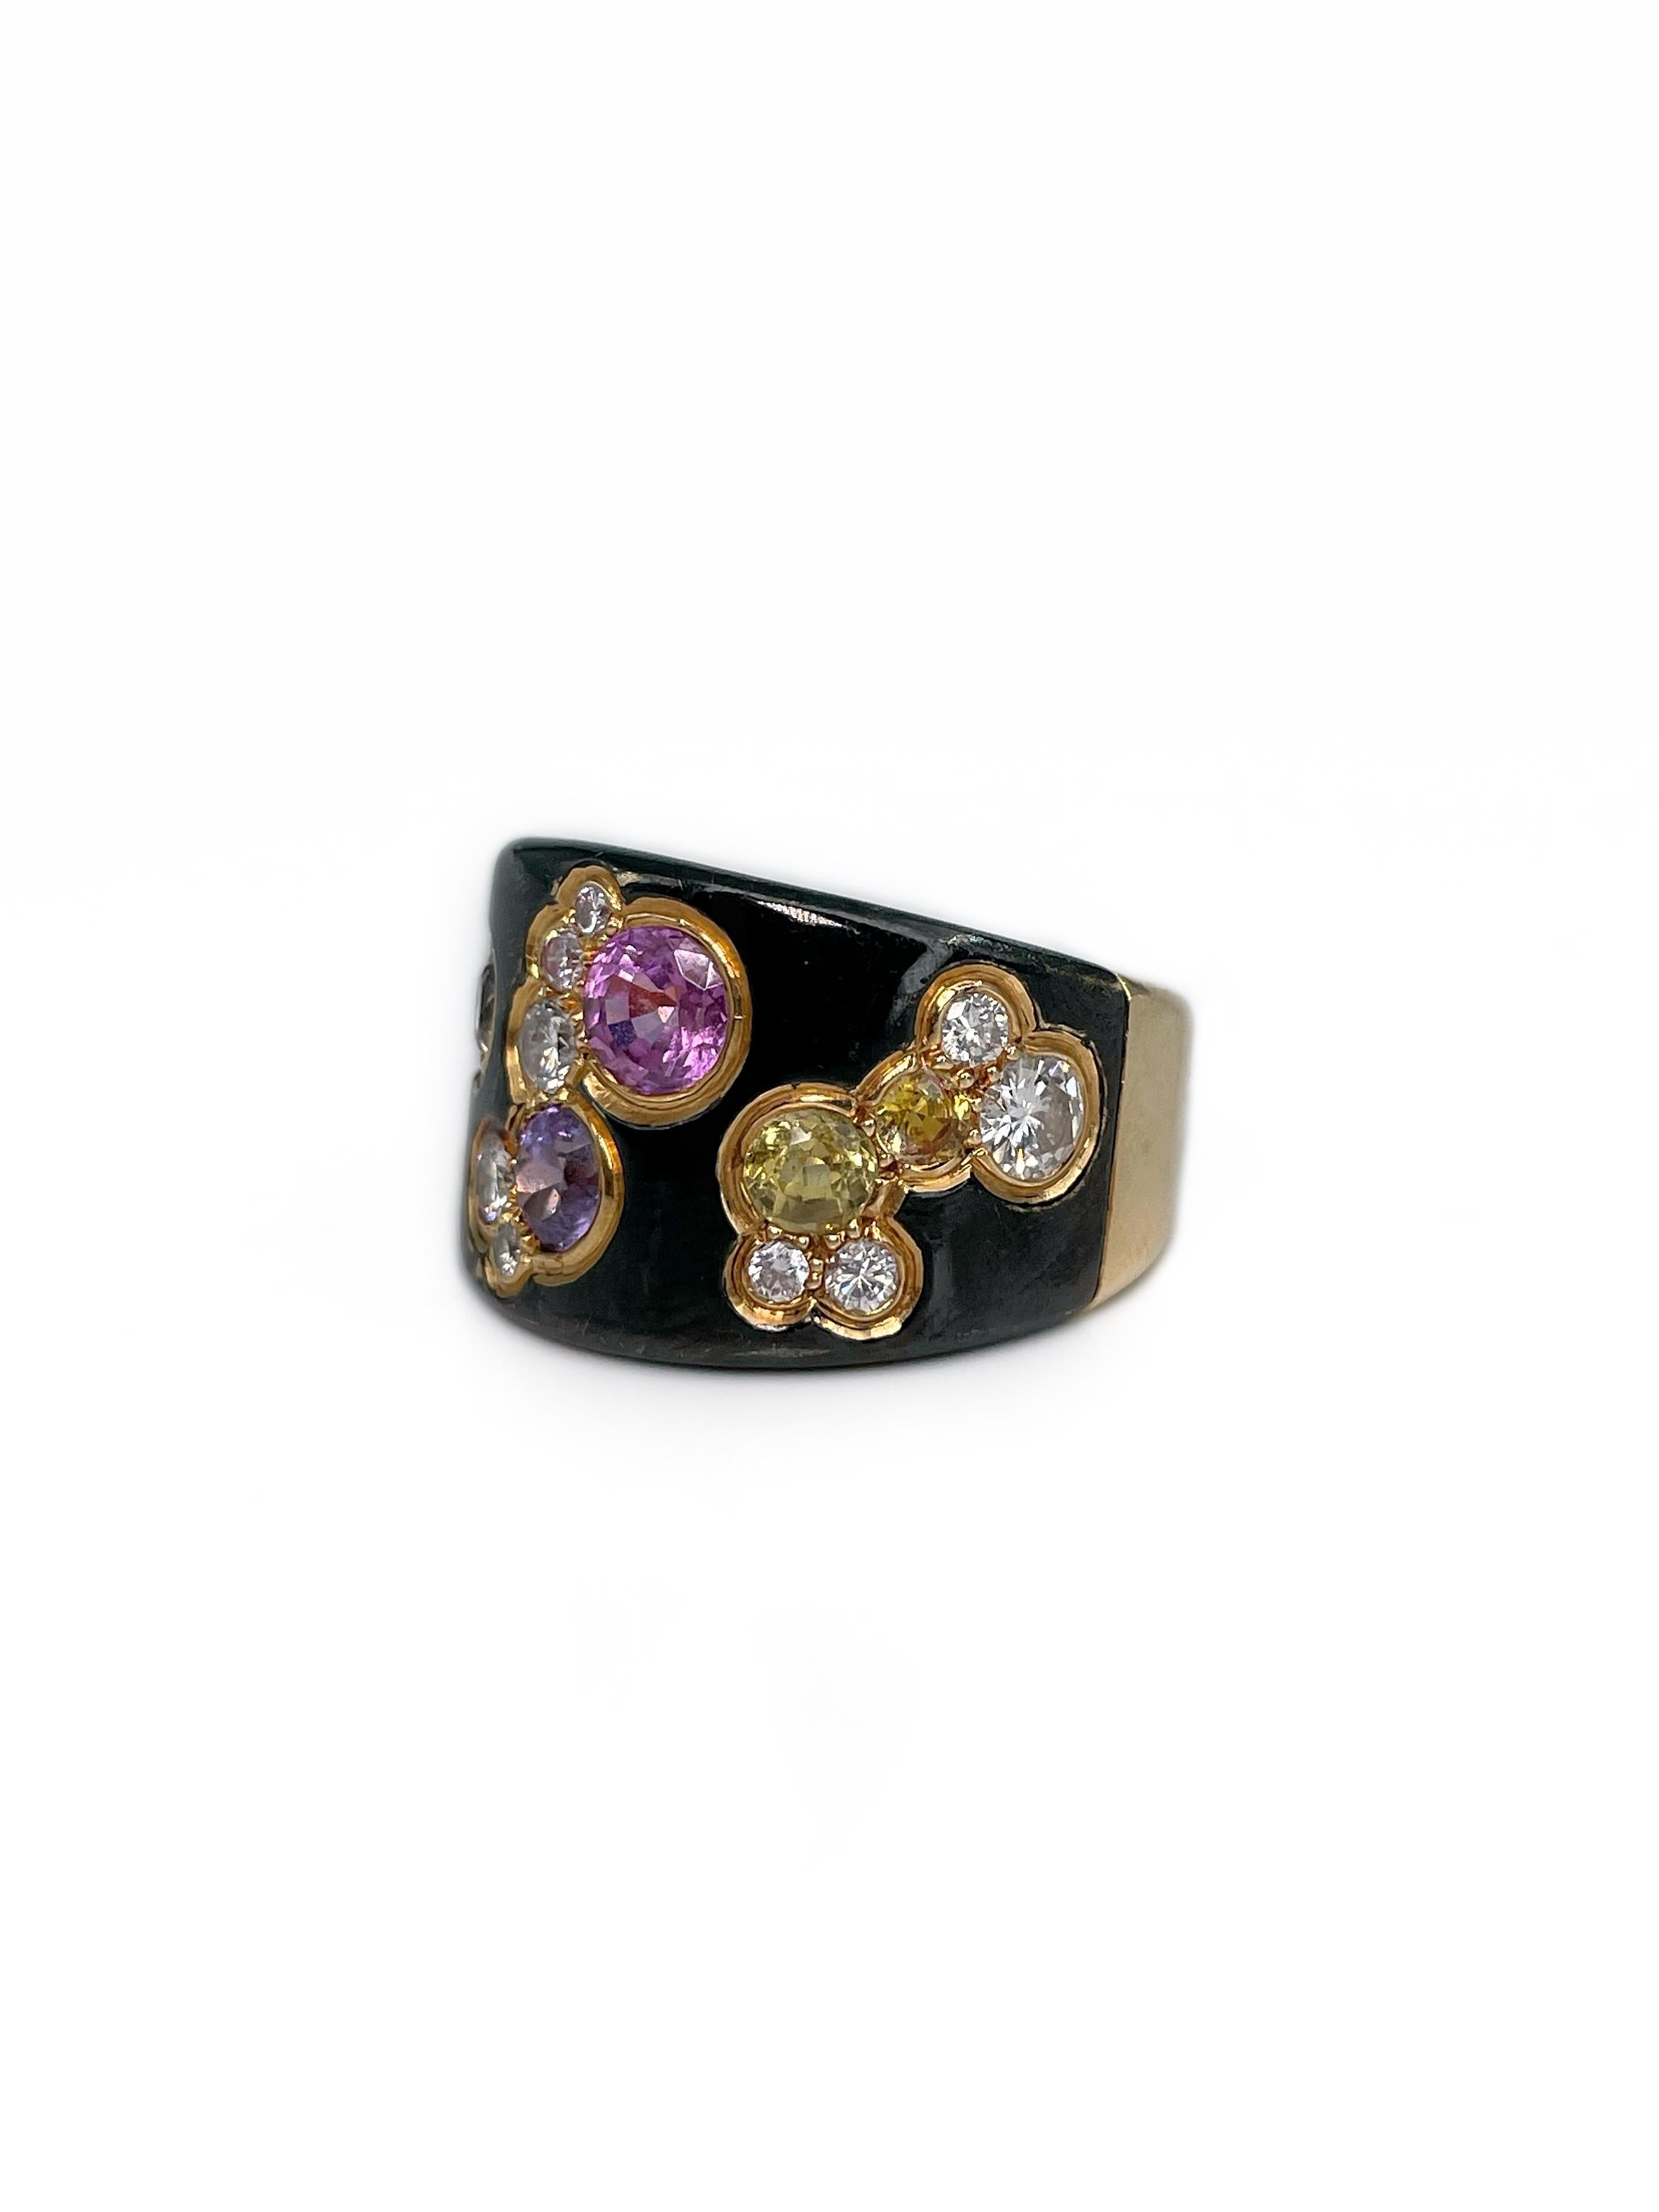 This is a gorgeous vintage cocktail ring designed by Italian jewellery house Marina B in 1990s. It was created for “Fujiyama” collection, inspired by Japanese cherry blossoms. 

Marina Bulgari is the granddaughter of the founder of the legendary